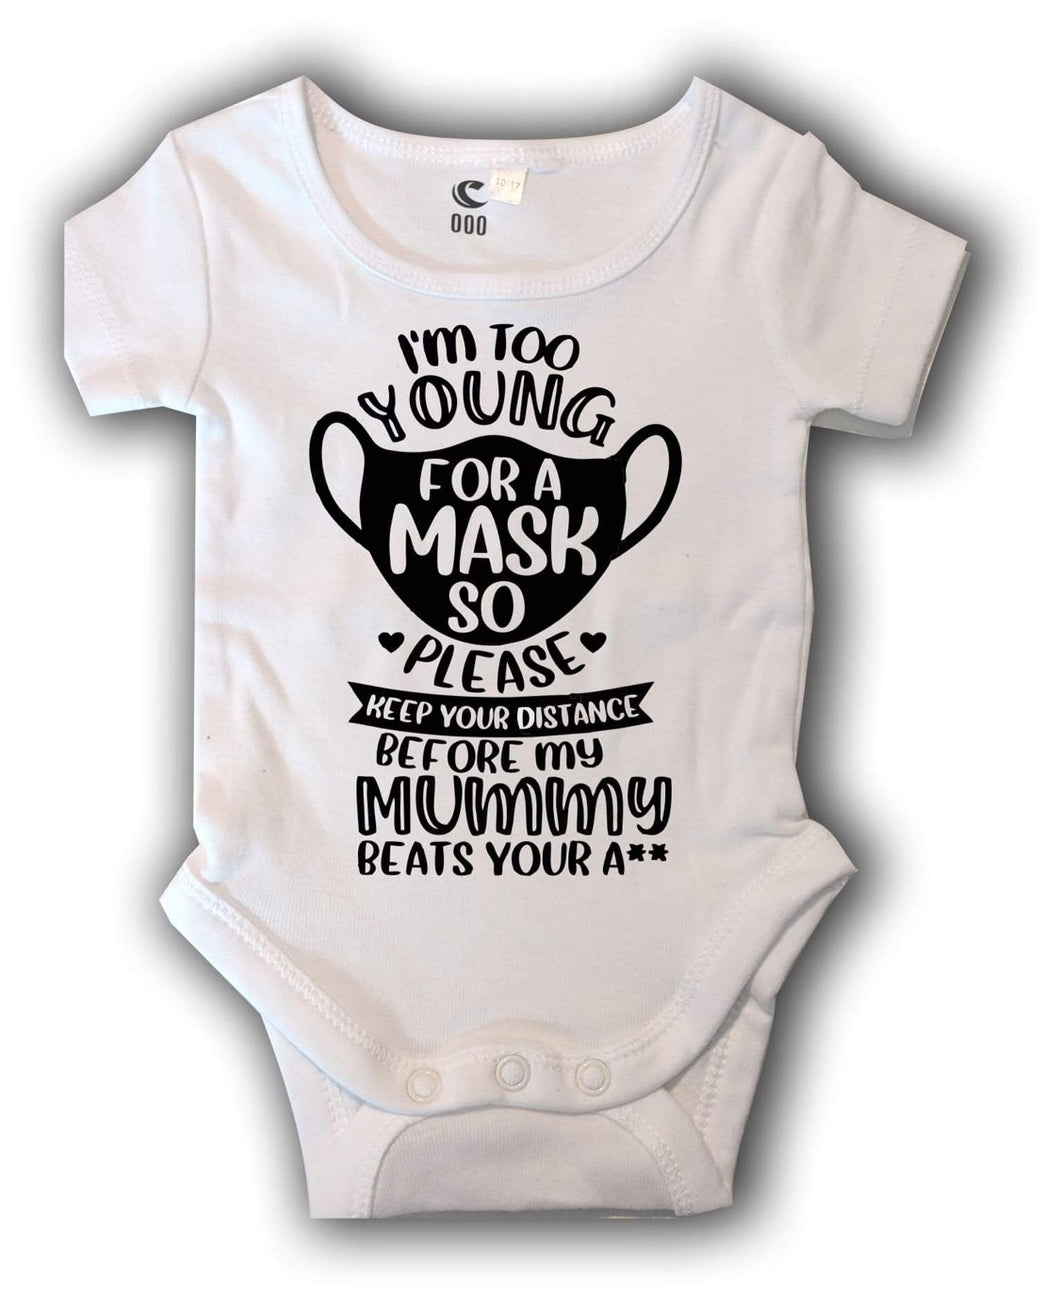 Too young for a mask romper / T-shirt